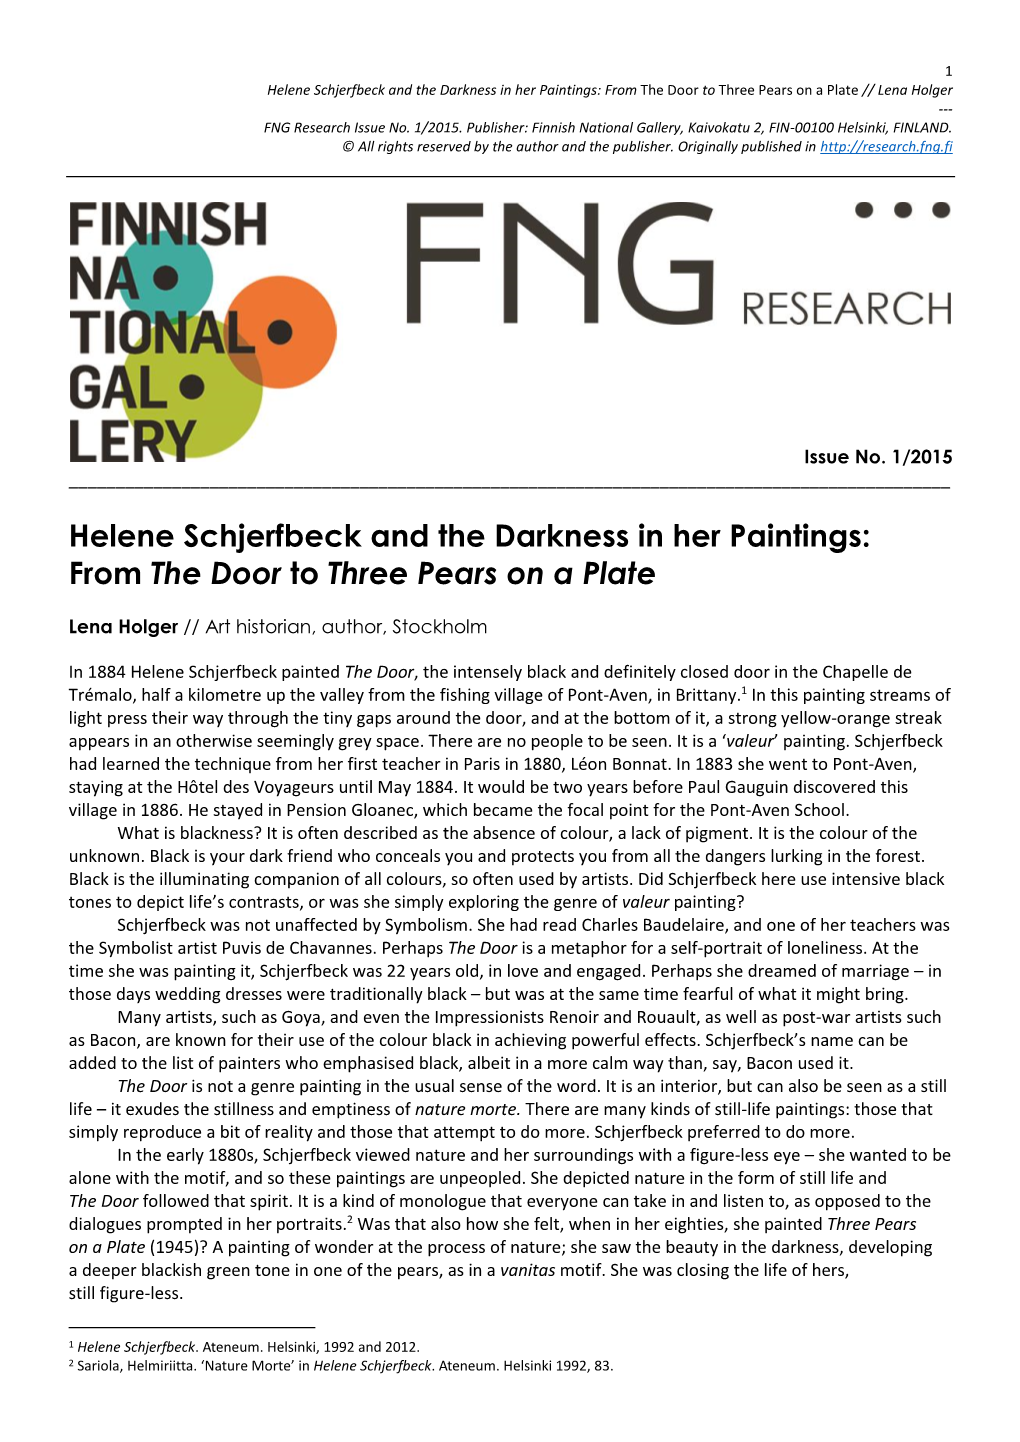 Helene Schjerfbeck and the Darkness in Her Paintings: from the Door to Three Pears on a Plate // Lena Holger --- FNG Research Issue No